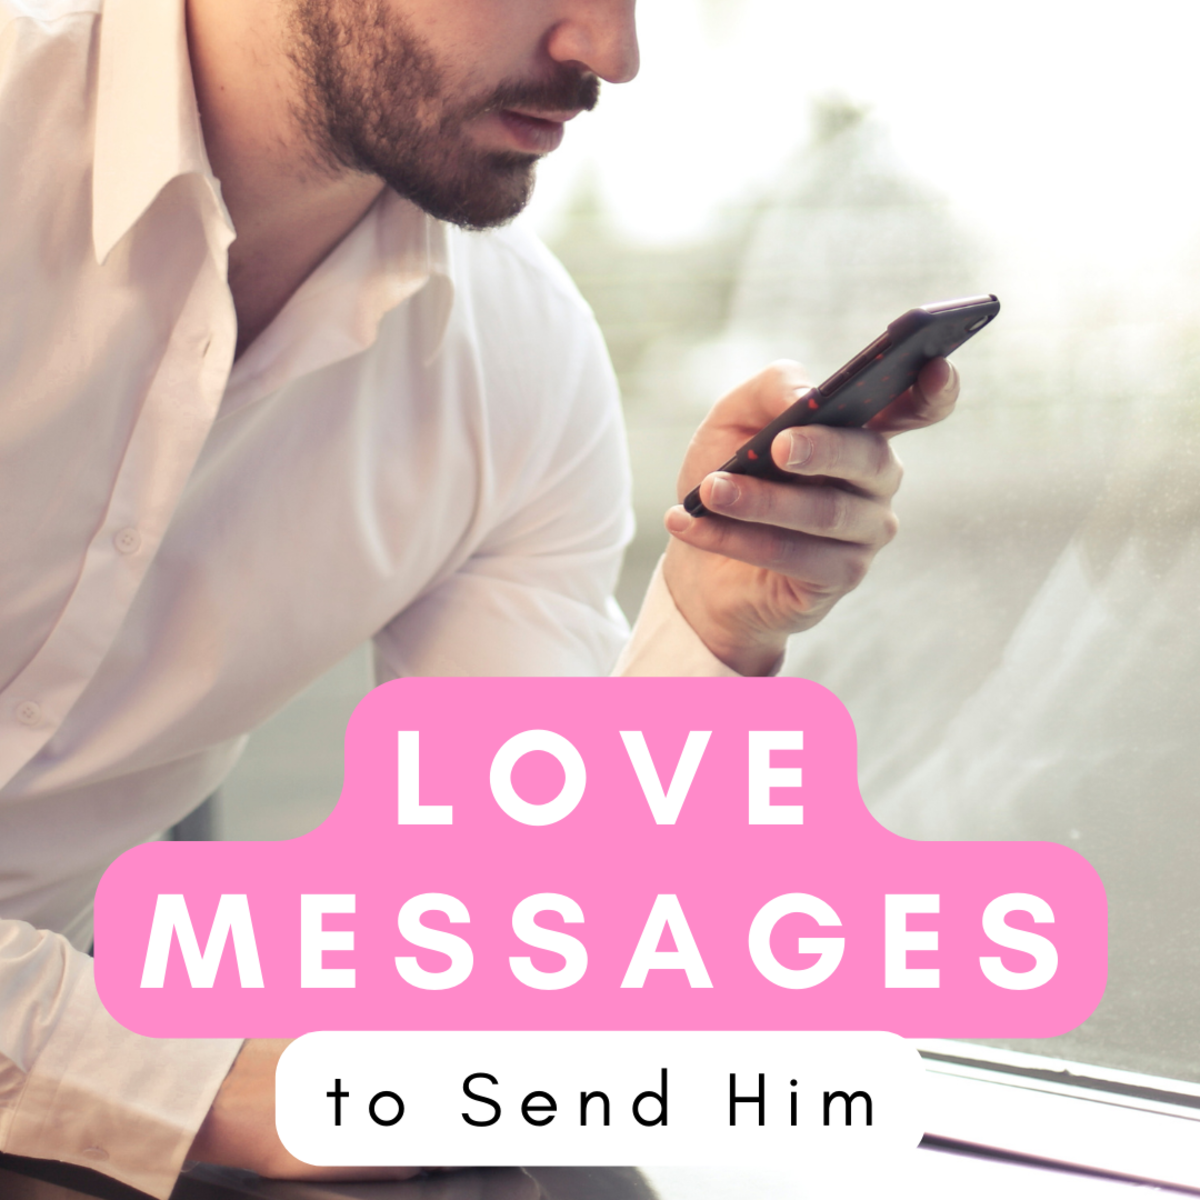 Love Quotes, Texts, Paragraphs, and Messages for Him - PairedLife